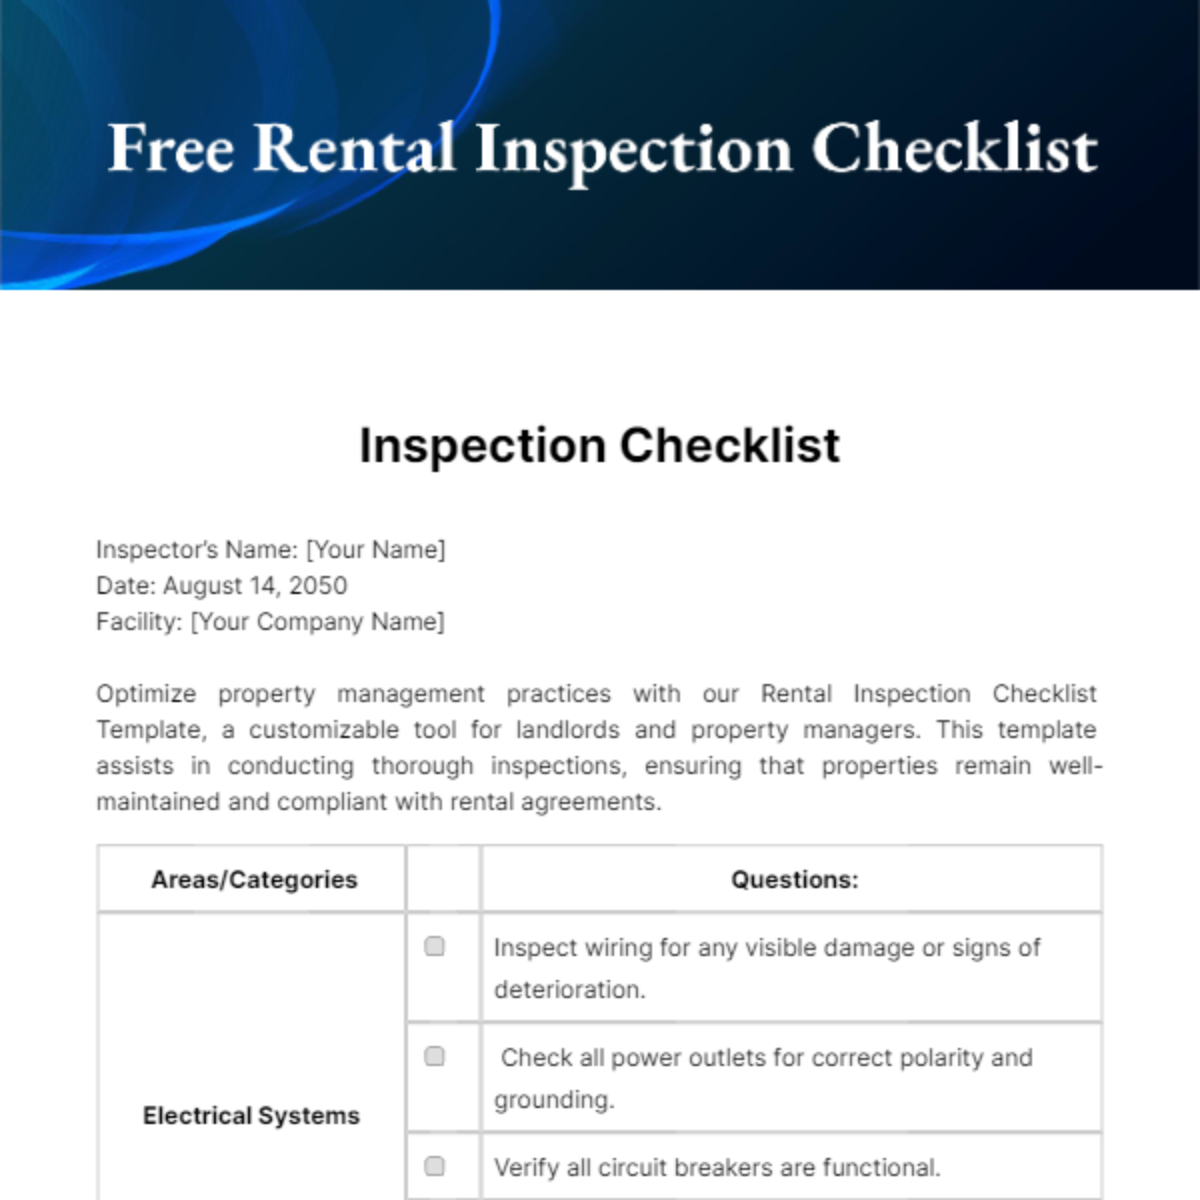 Free Rental Inspection Checklist Template